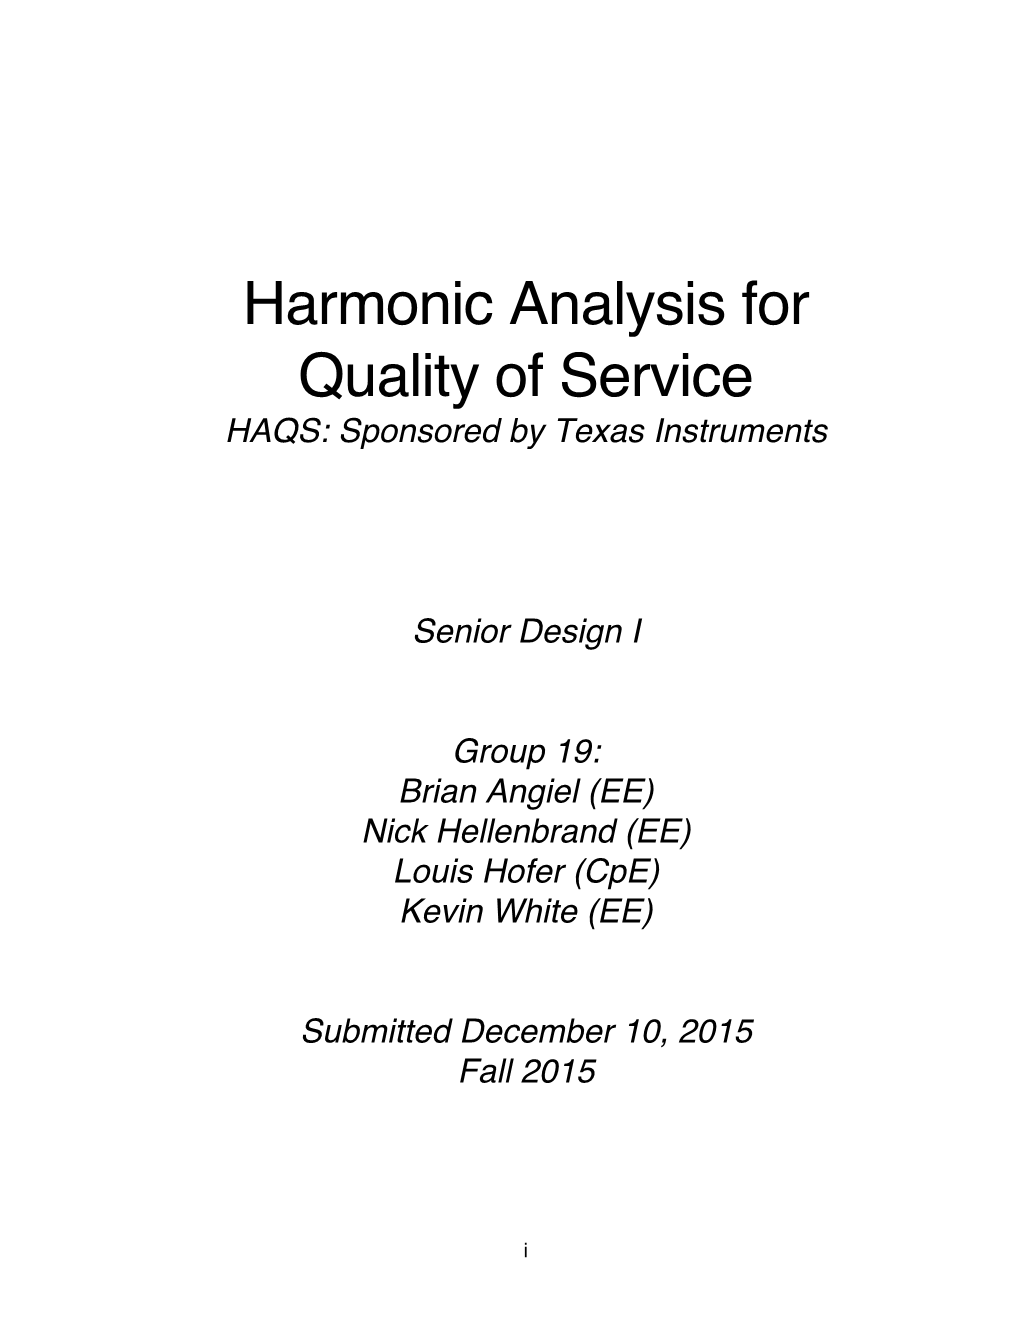 Harmonic Analysis for Quality of Service HAQS: Sponsored by Texas Instruments